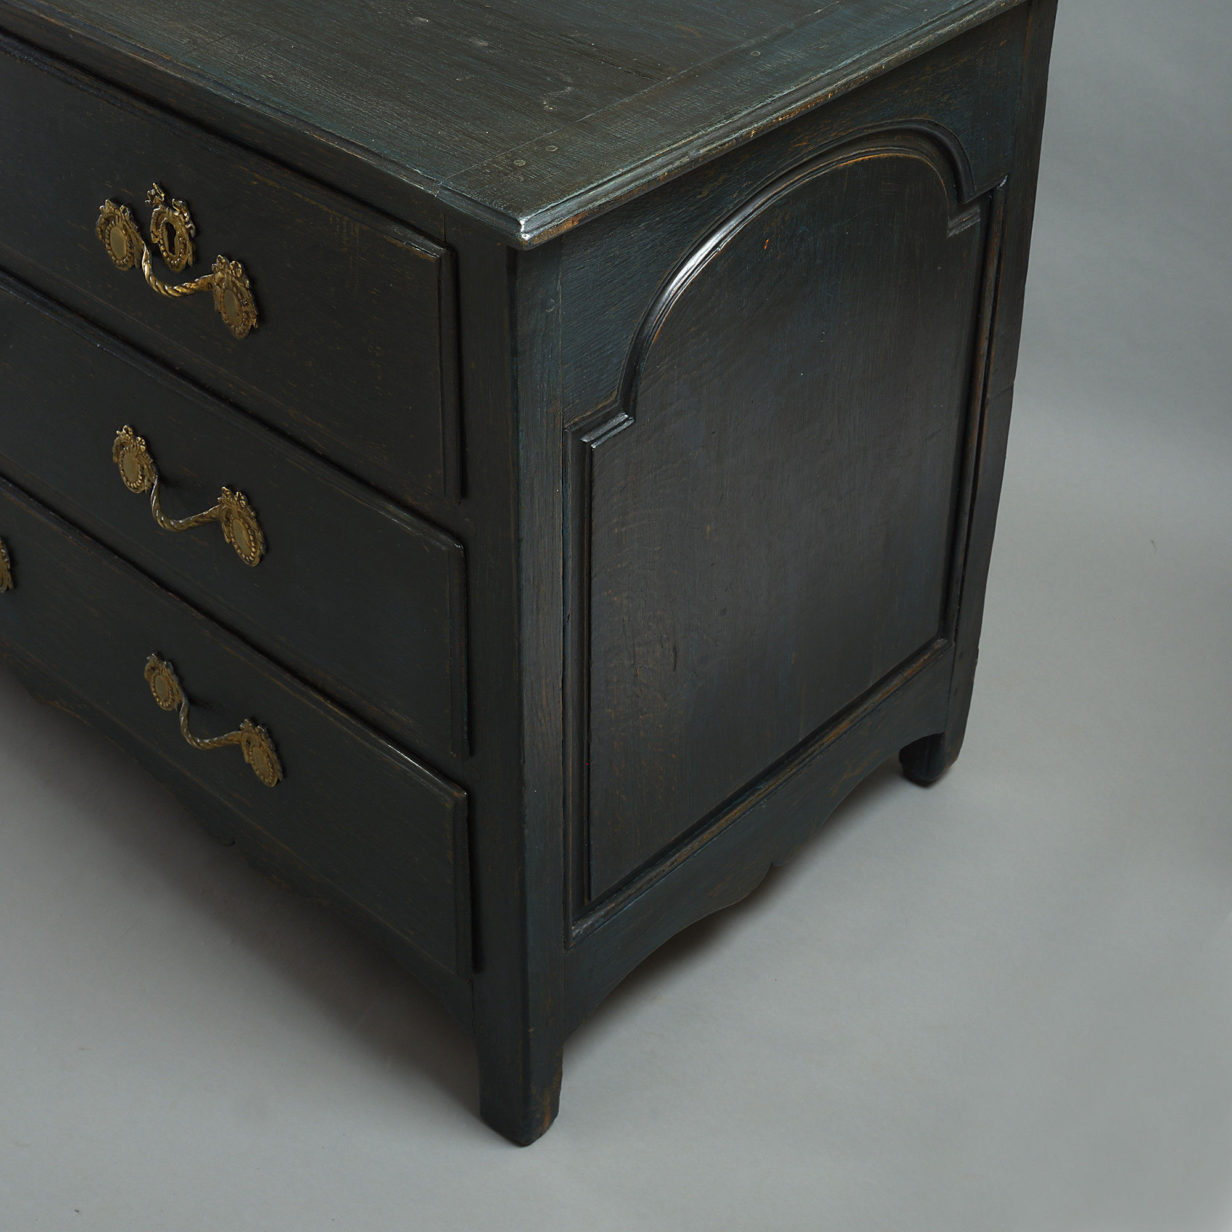 18th century louis xv period black painted commode